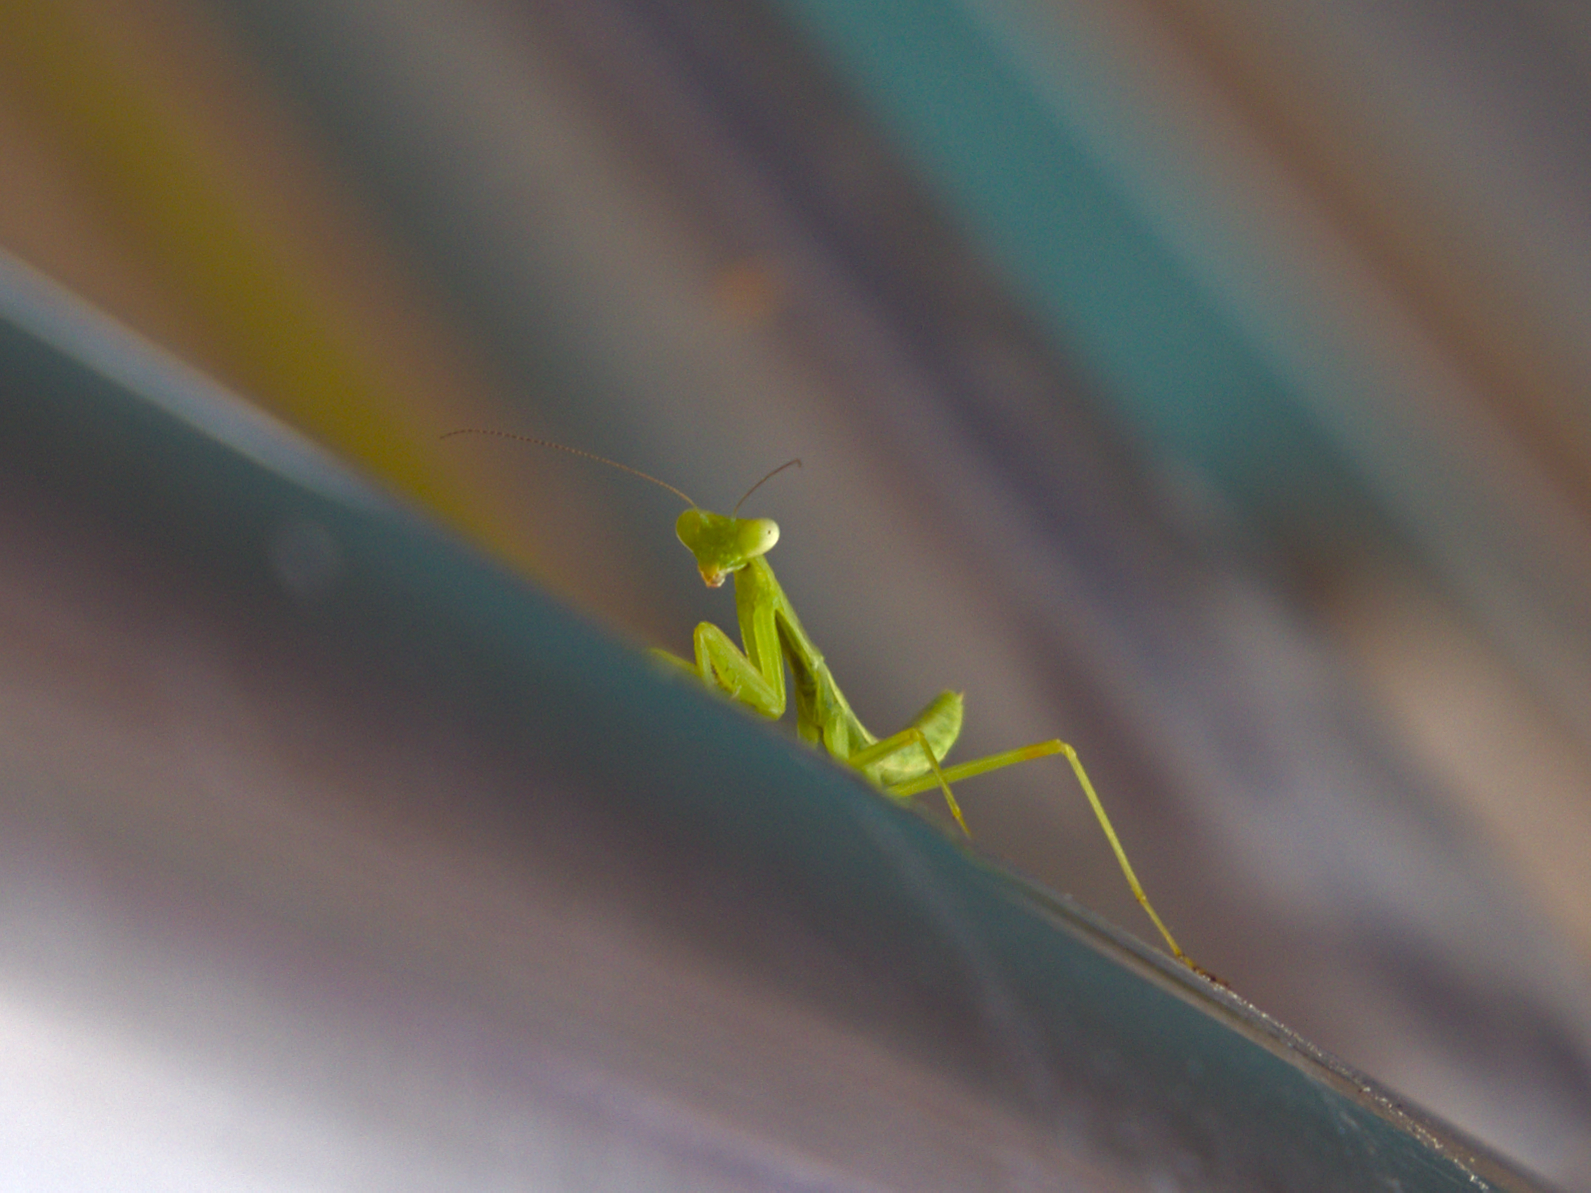 tiny mantis with large eyes on stainless steal banister